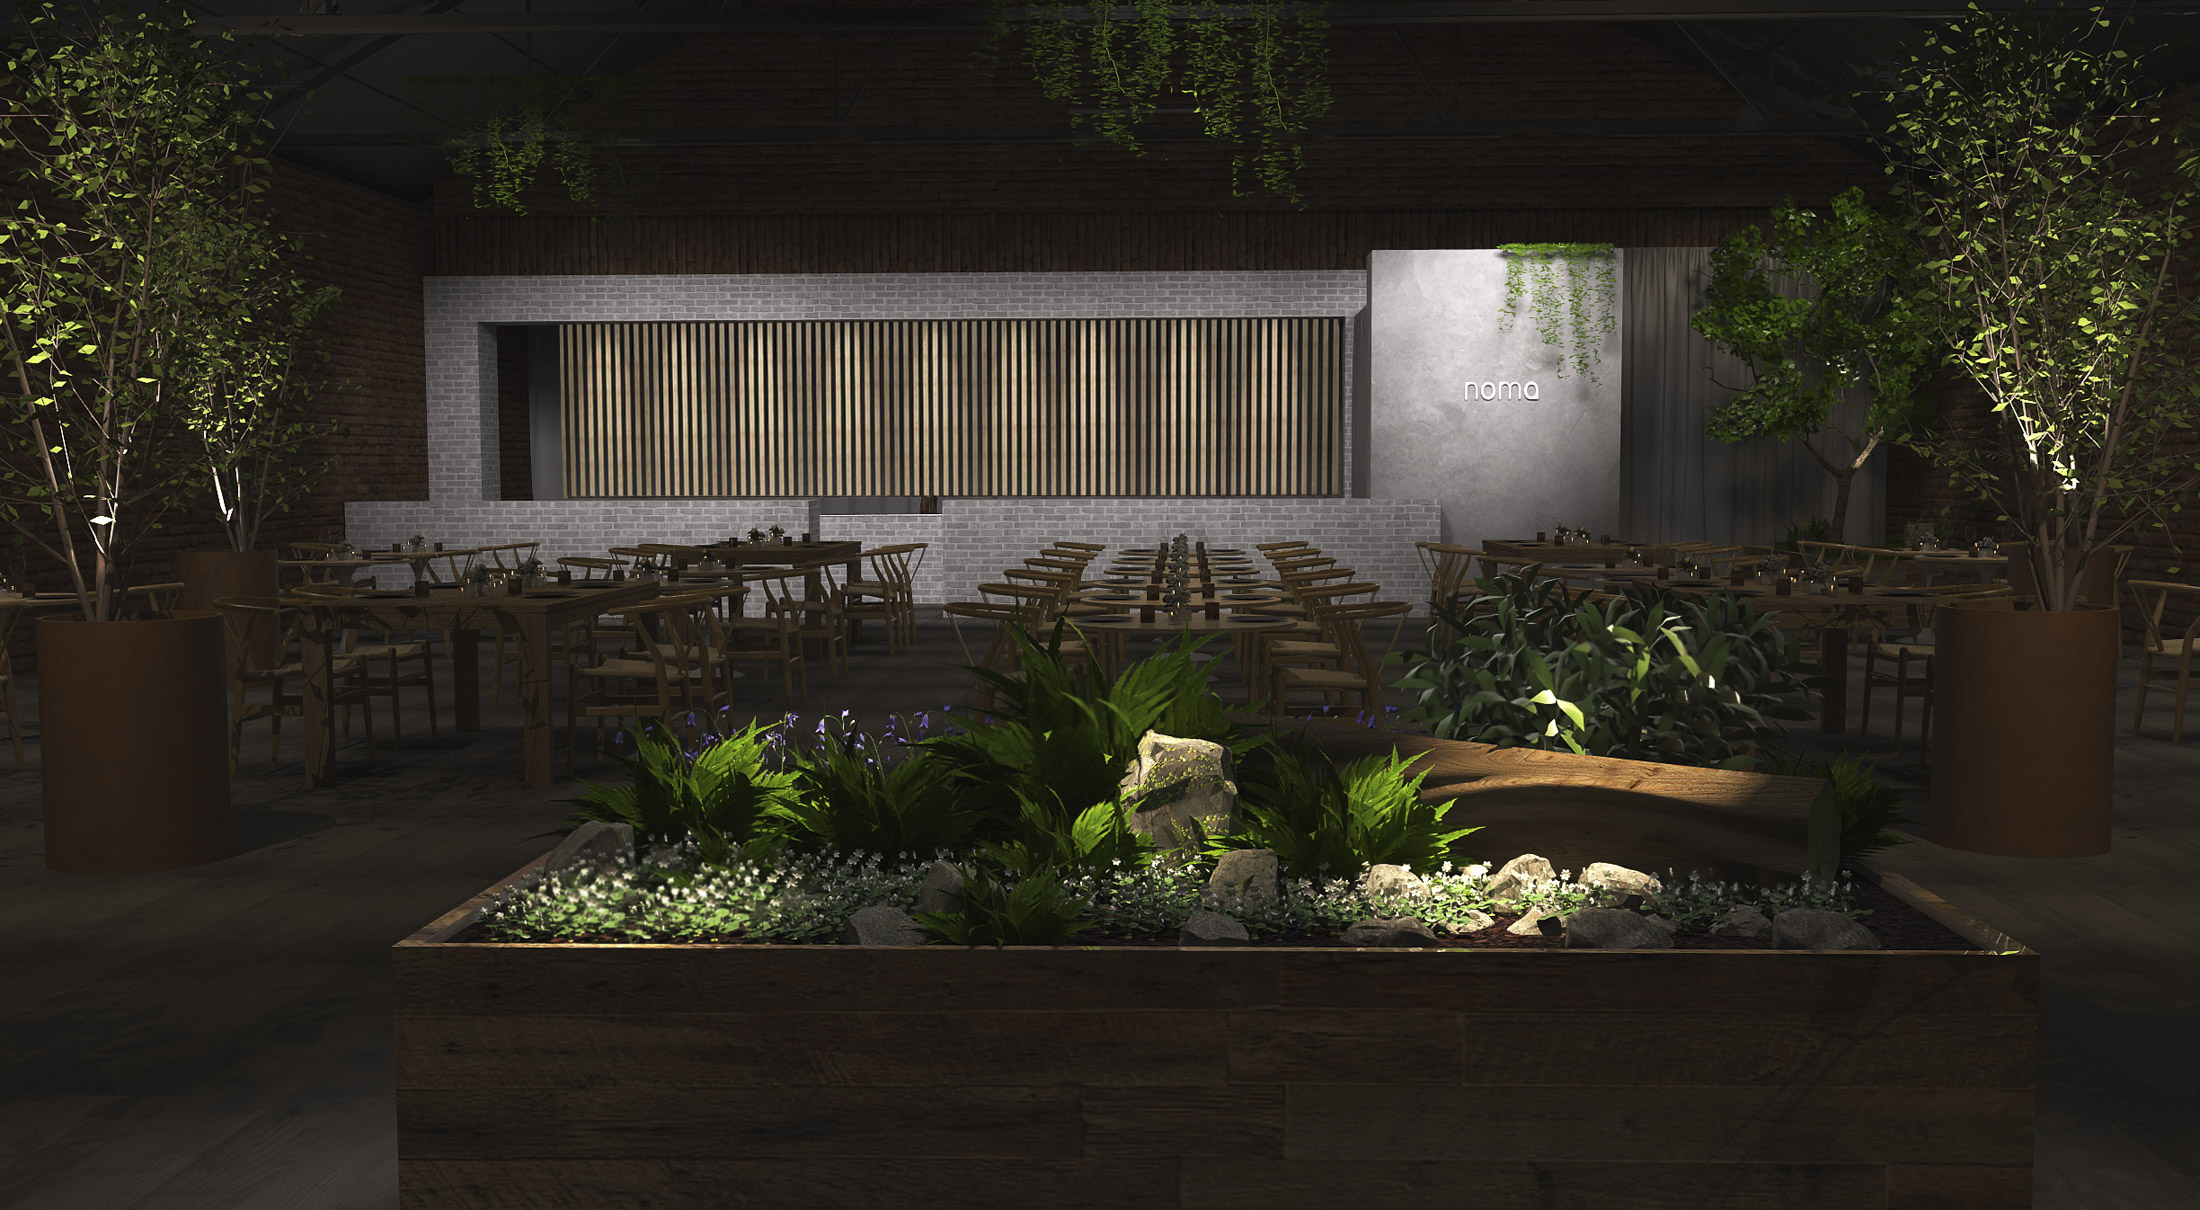 A rendering of the Noma dining room in Brooklyn, N.Y.